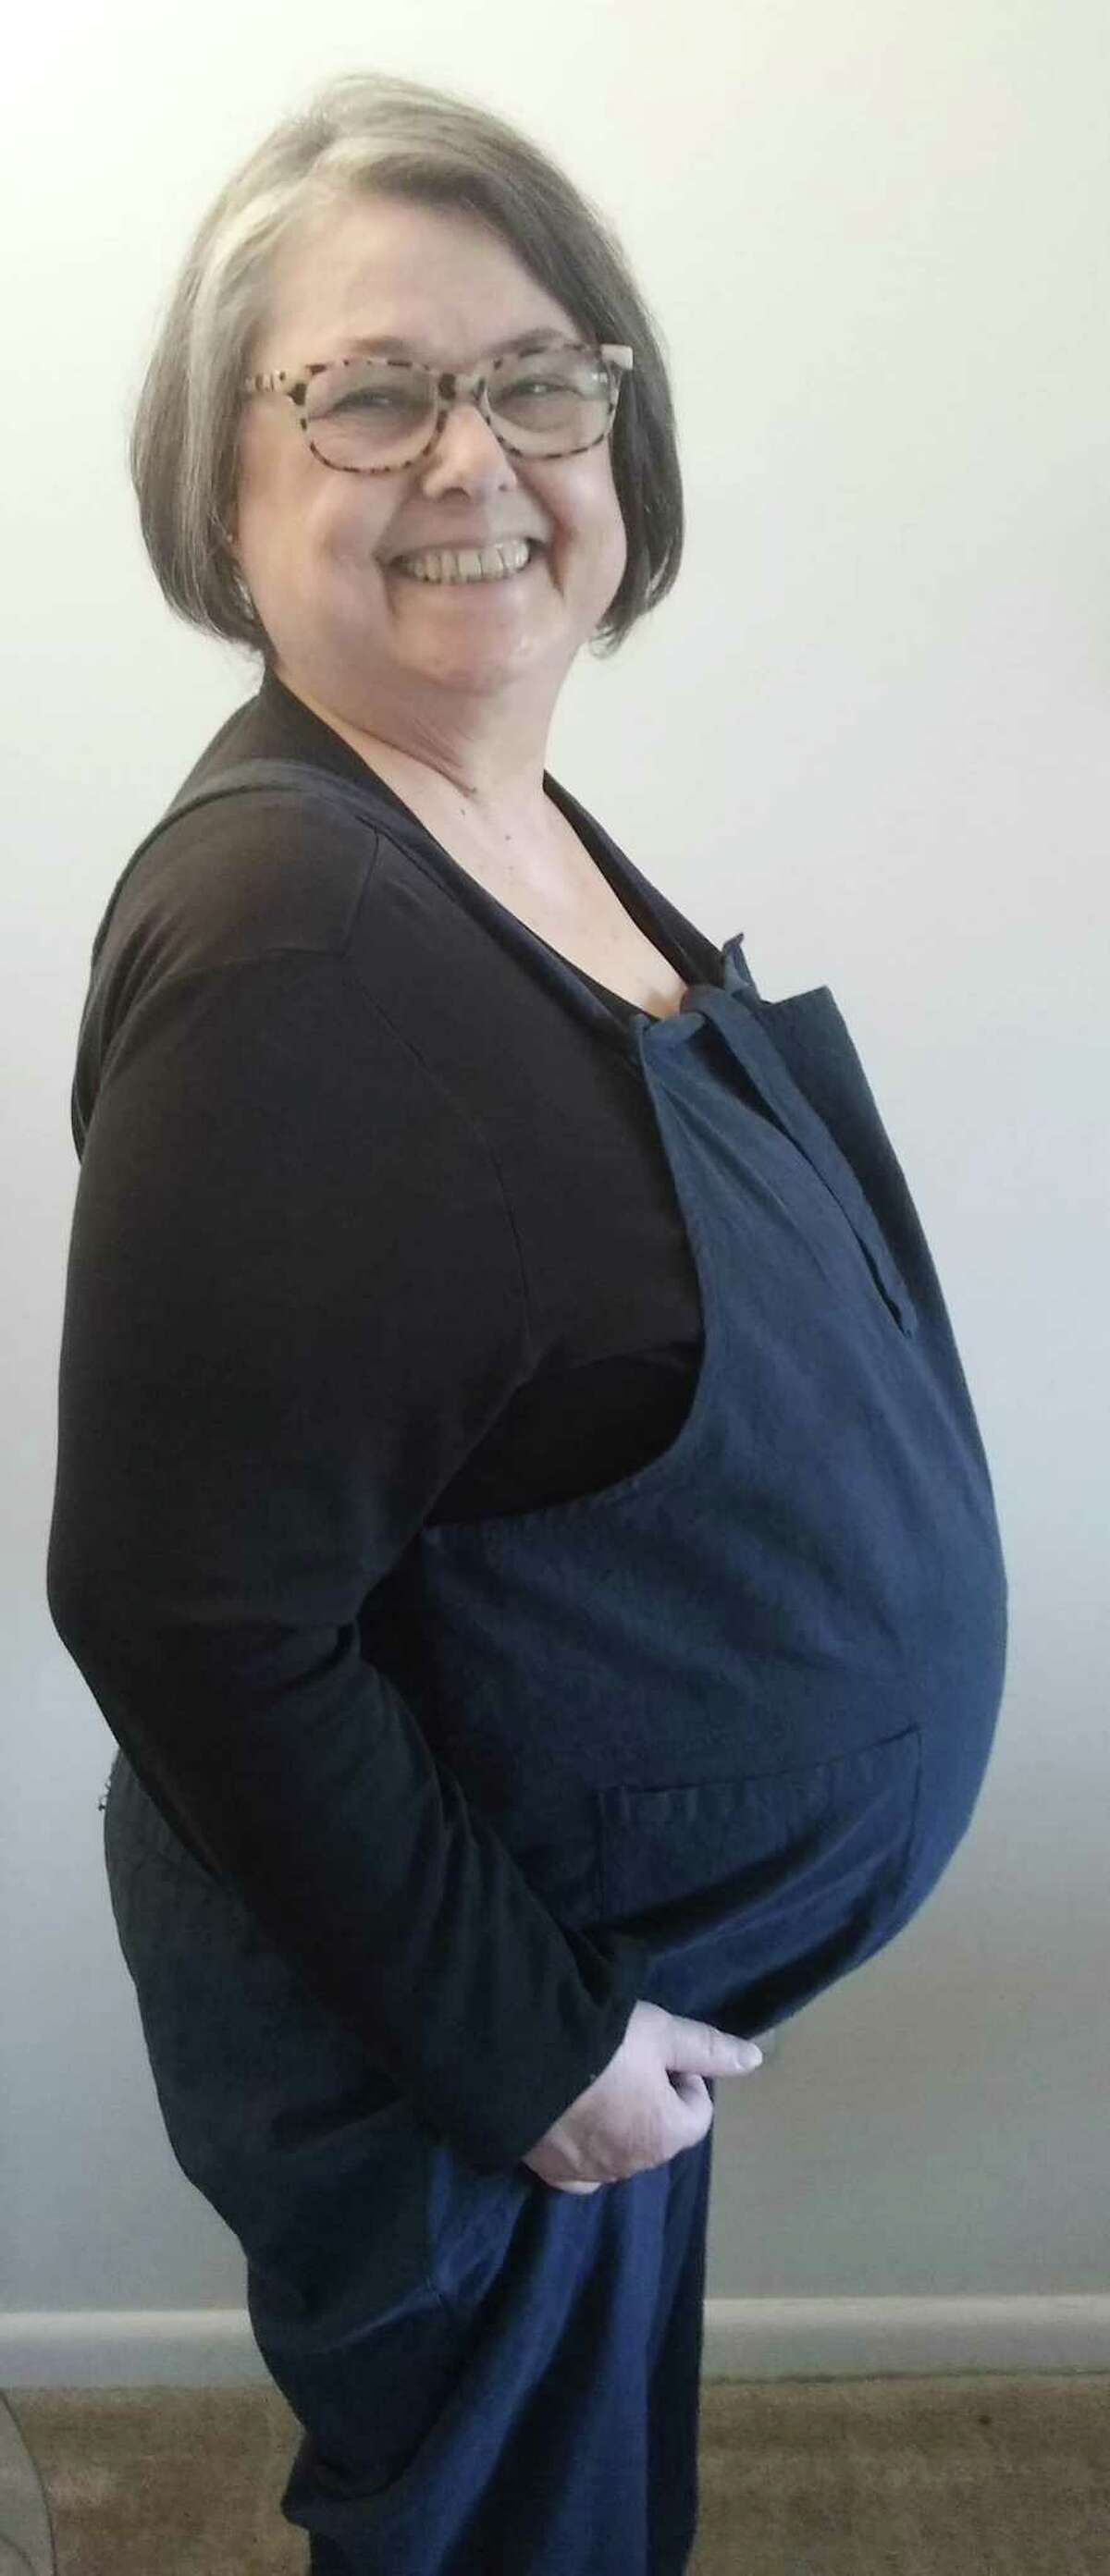 Karen Smyrski-Smith is shown above in September of 2019. Her belly is due to the progression of Autosomal Dominant Polycystic Kidney Disease.